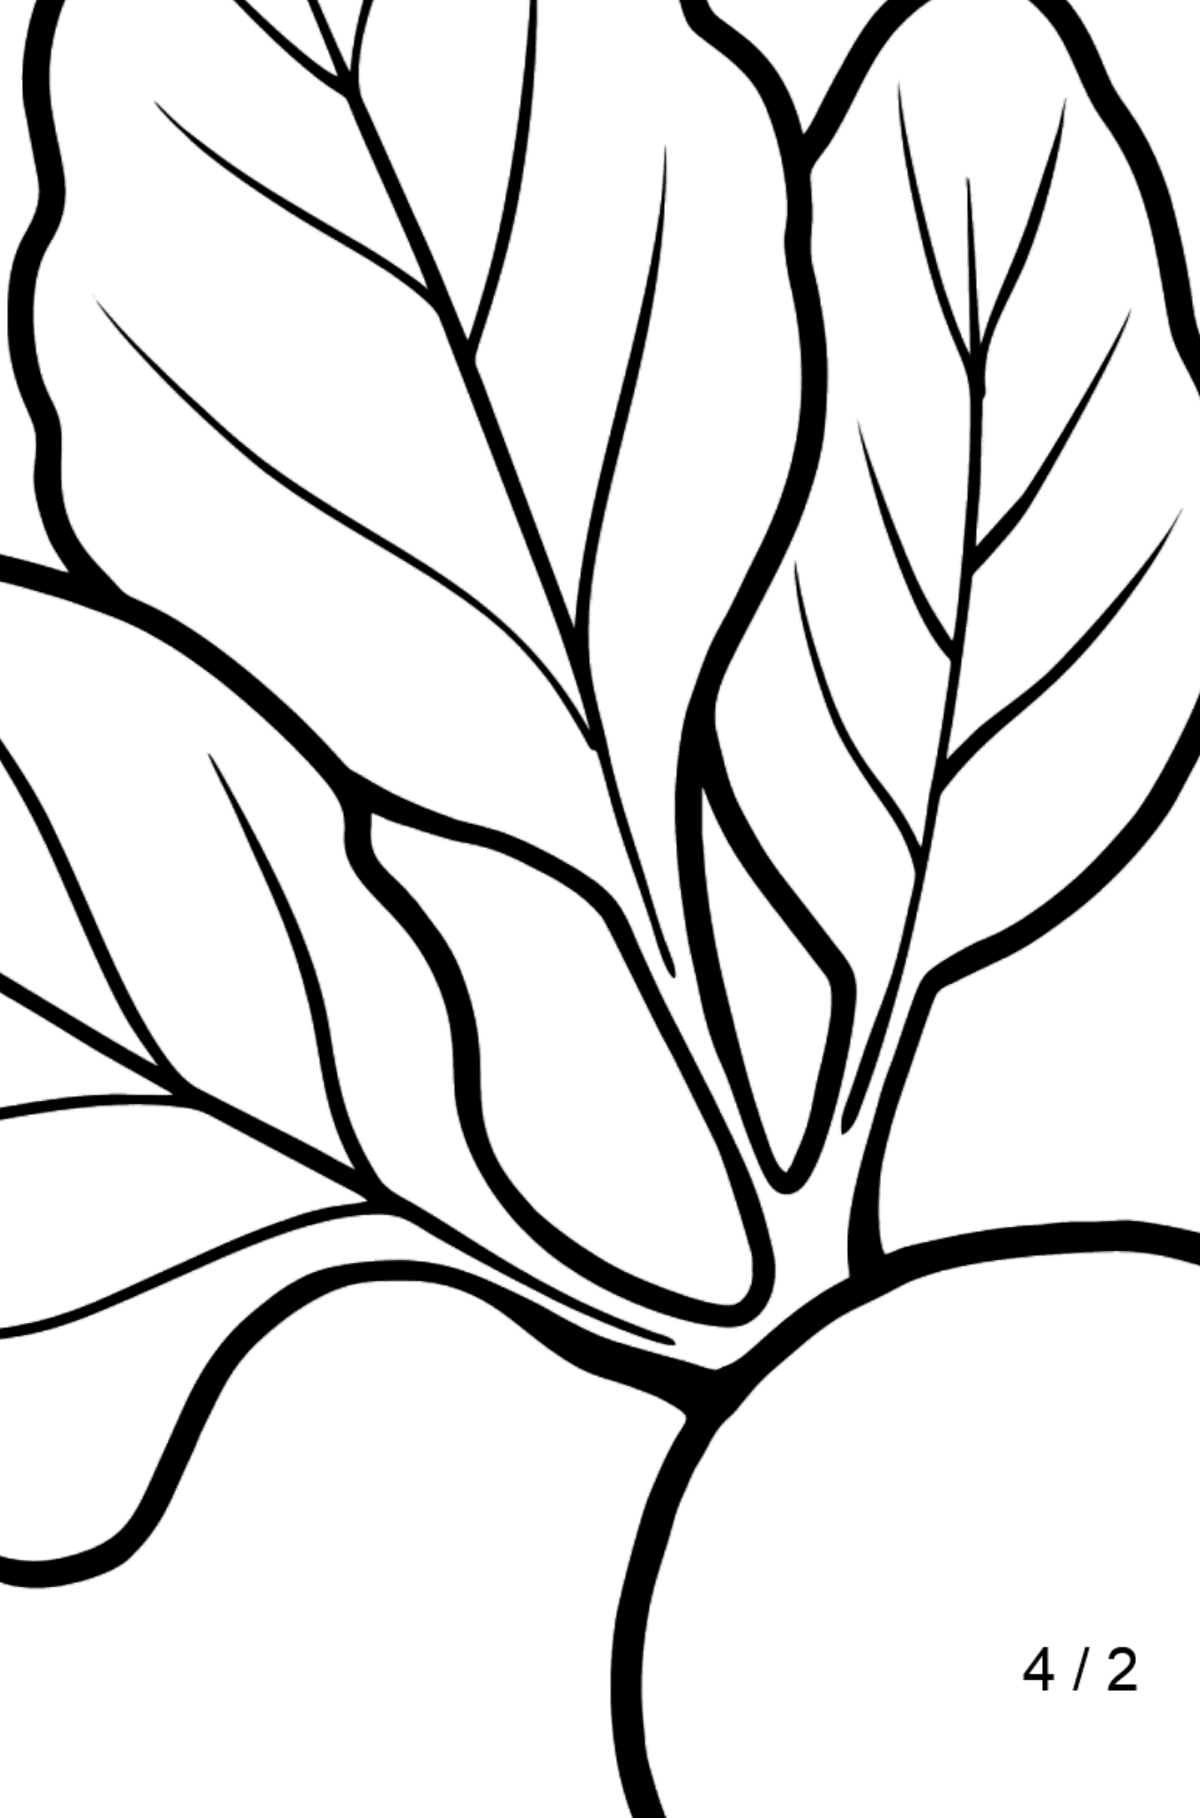 Beet coloring page - Math Coloring - Division for Kids